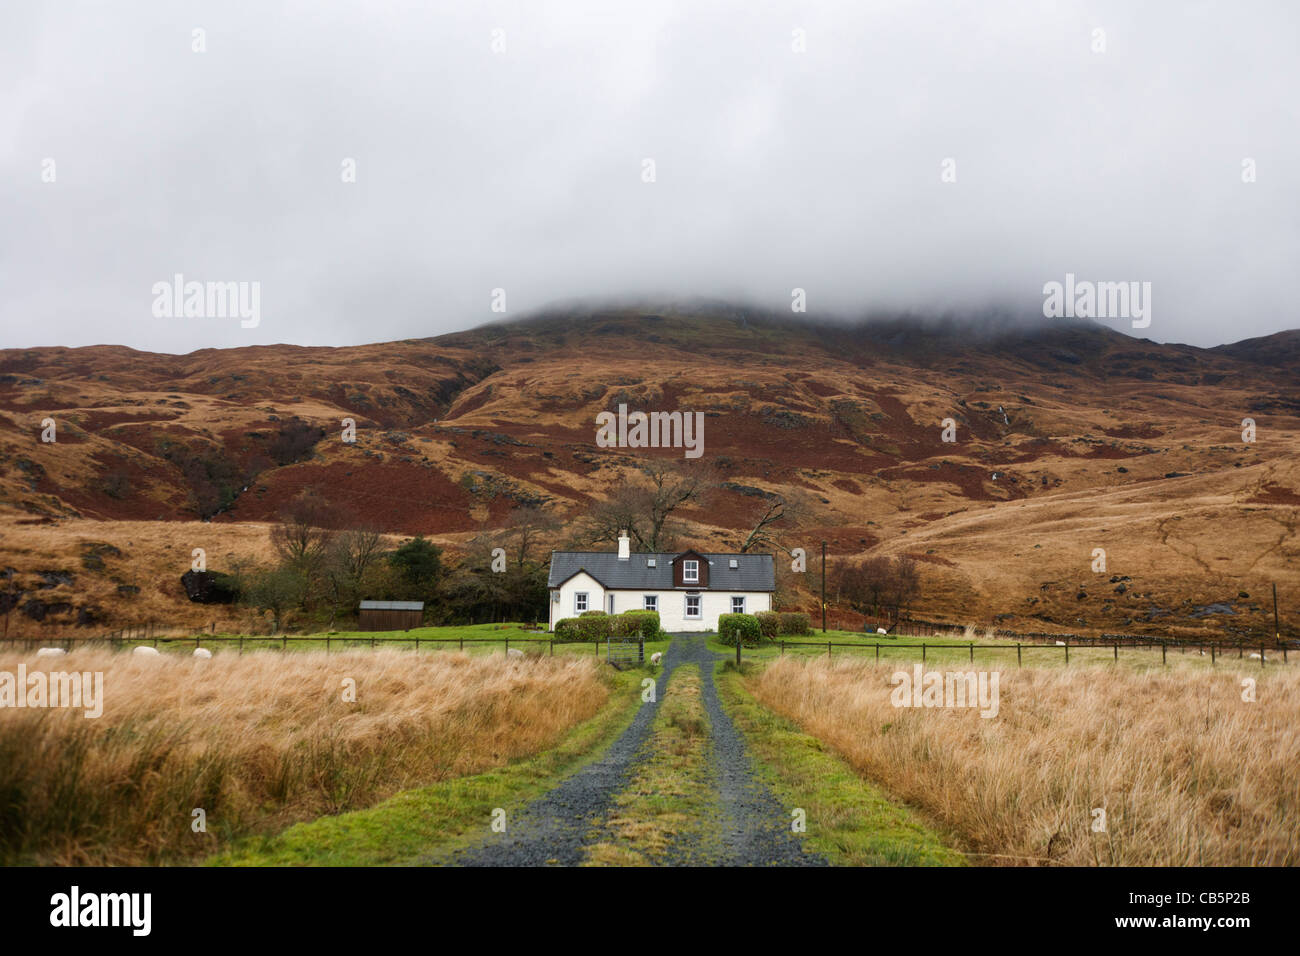 Self-catering farmhouse at Lochbuie, Isle of Mull, Scotland. Stock Photo